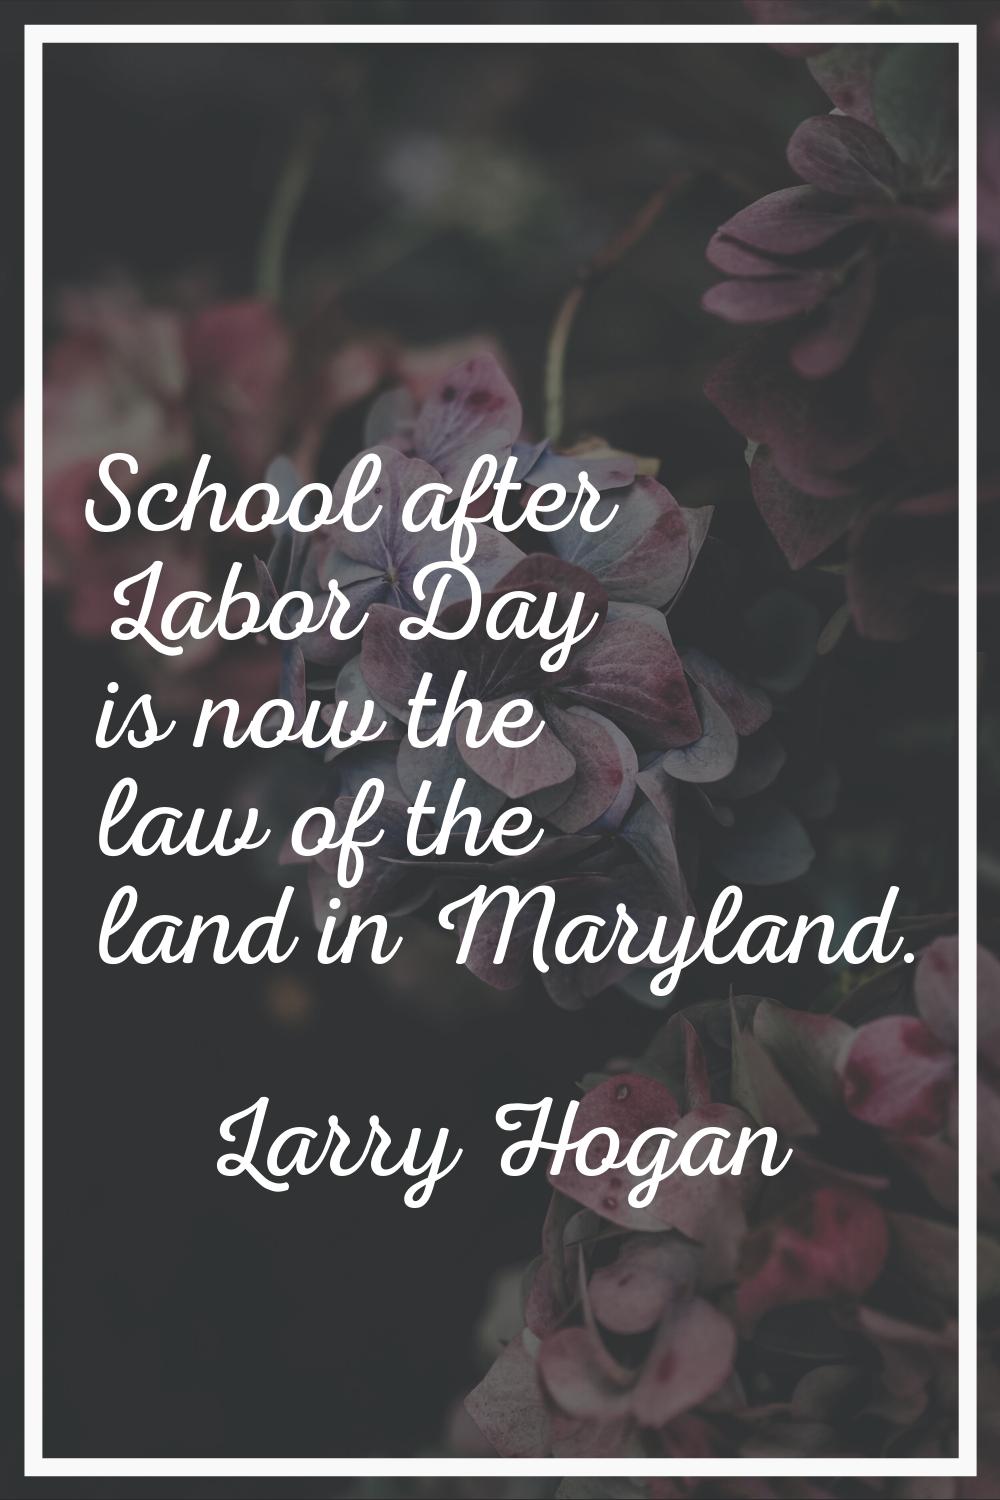 School after Labor Day is now the law of the land in Maryland.